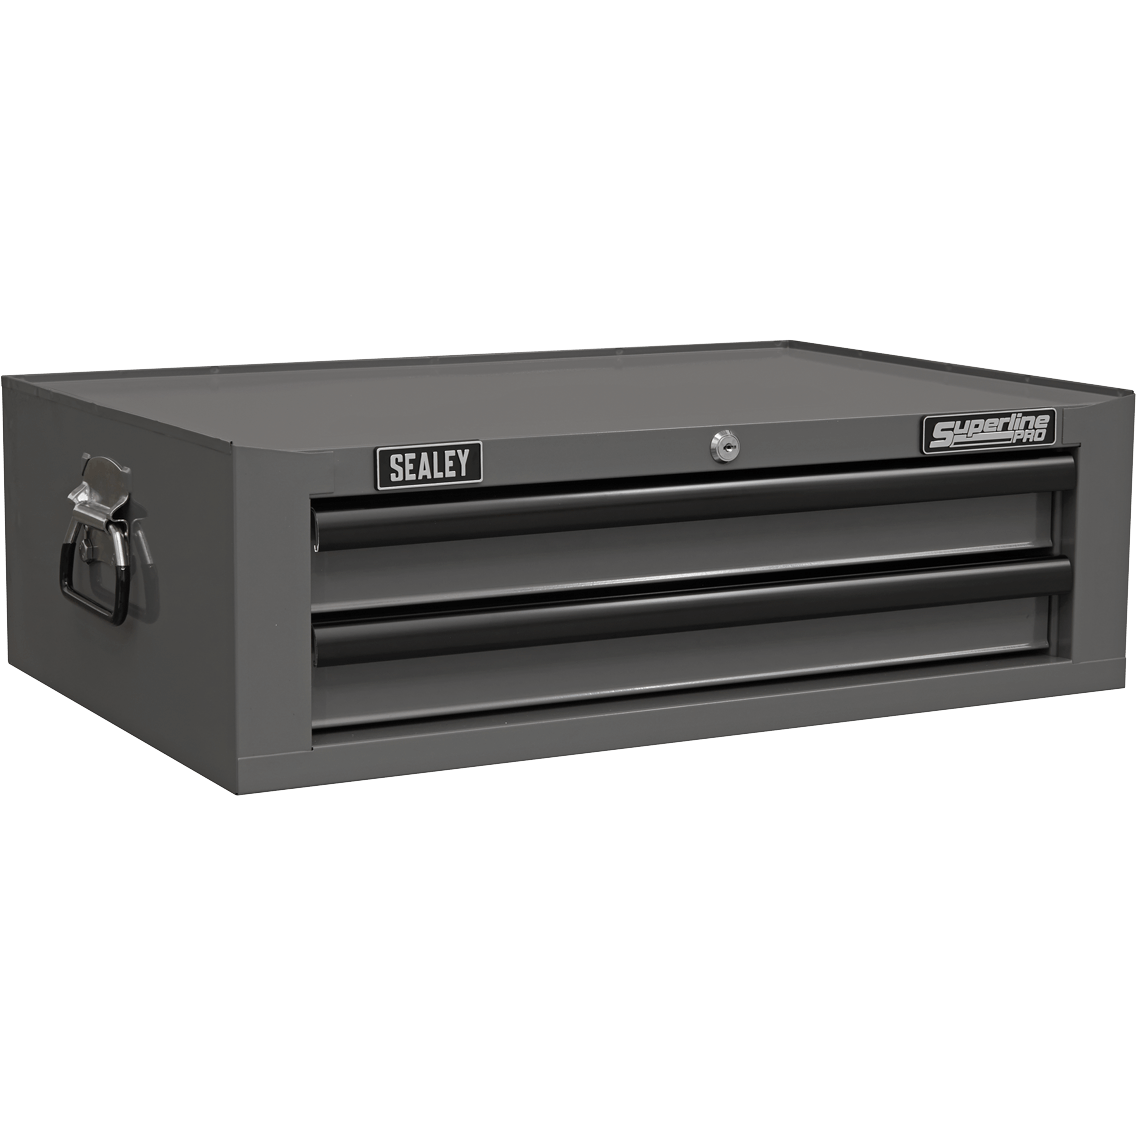 Sealey Superline Pro 2 Drawer Mid Tool Chest Grey